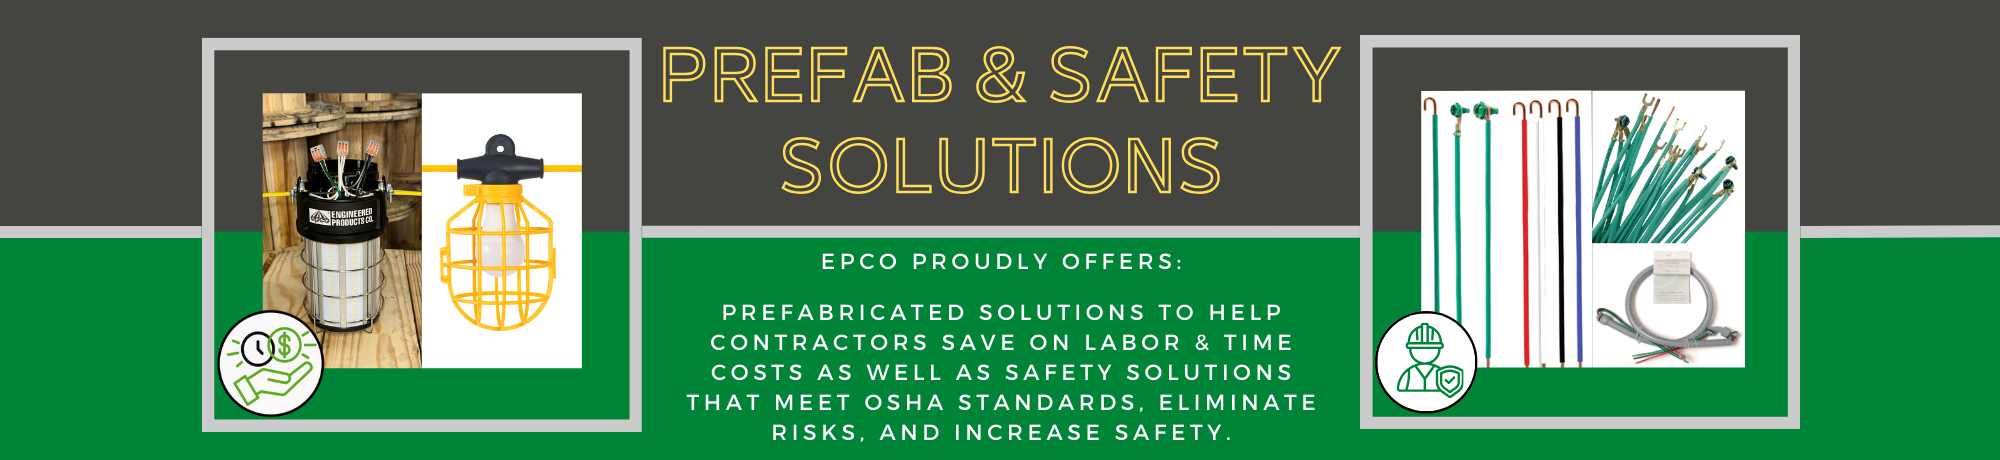 Prefab and Safety Solutions